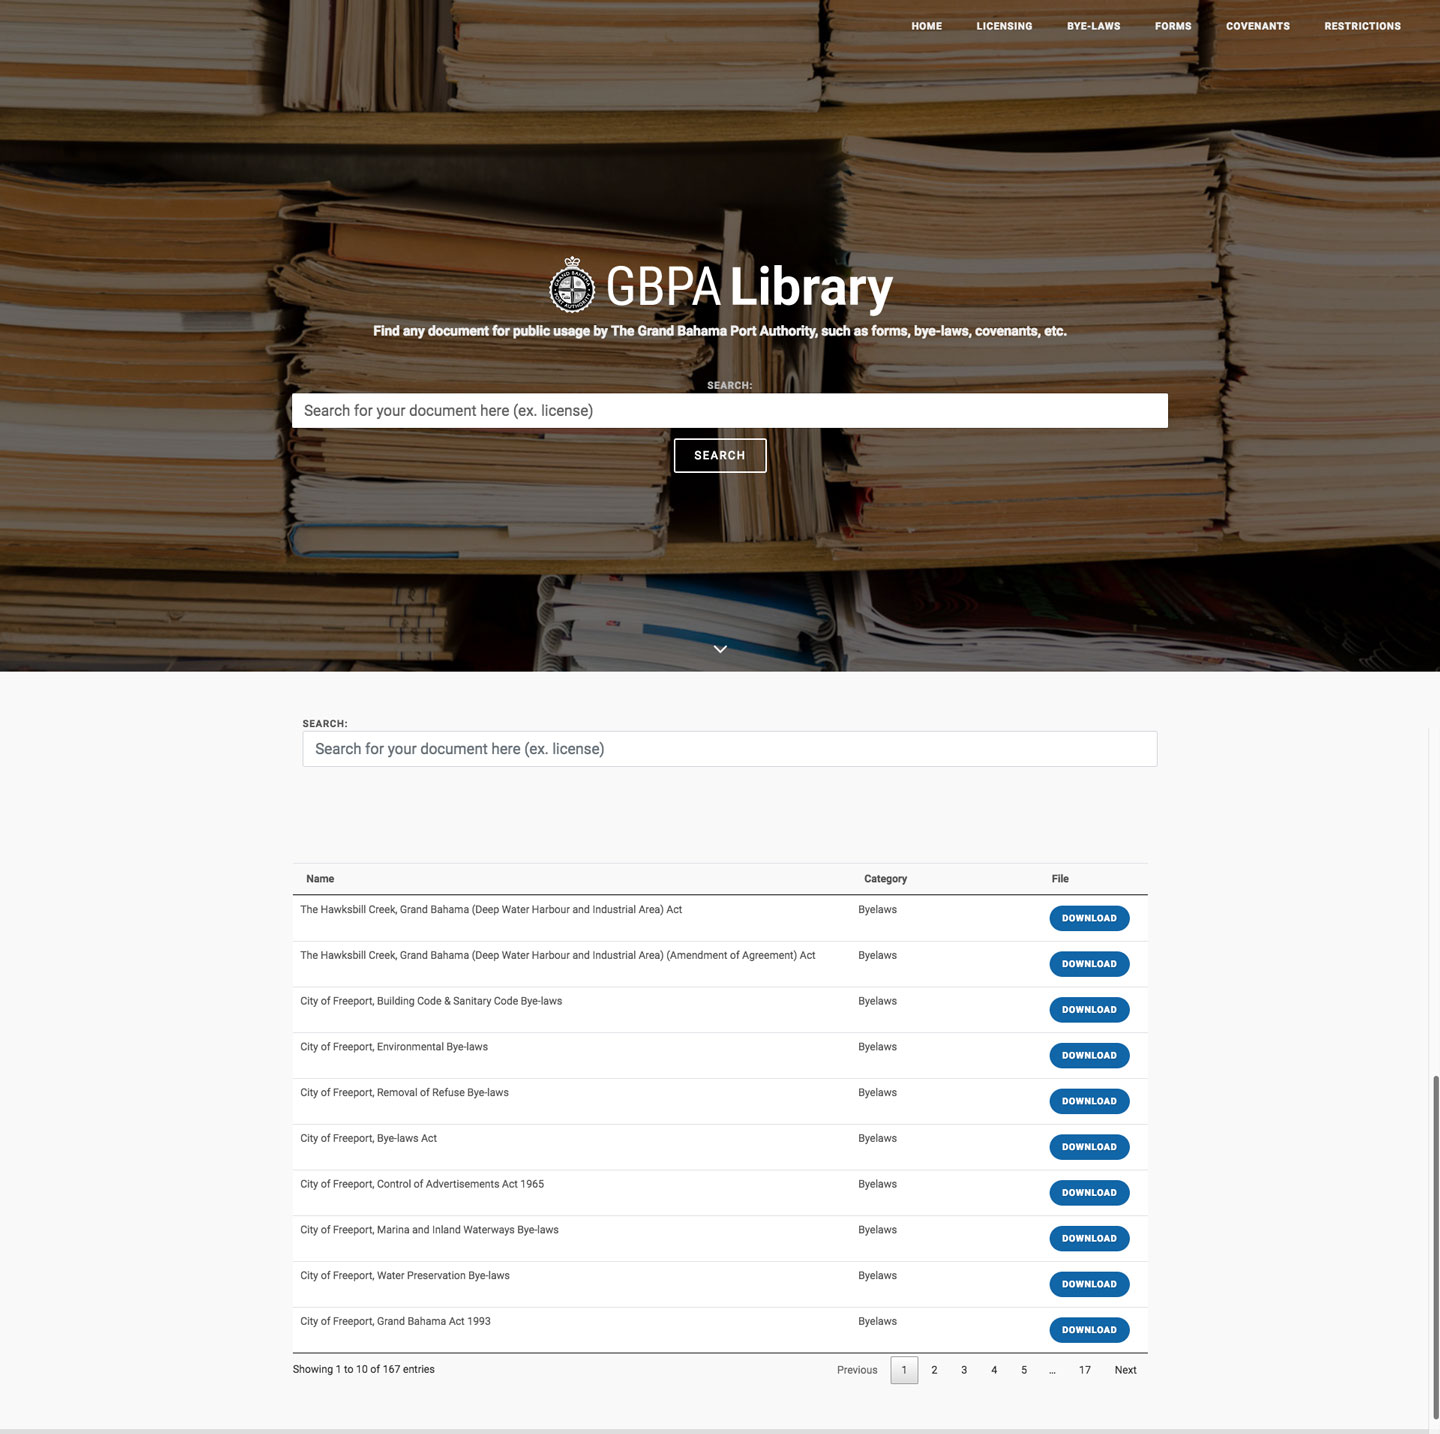 GBPA Library